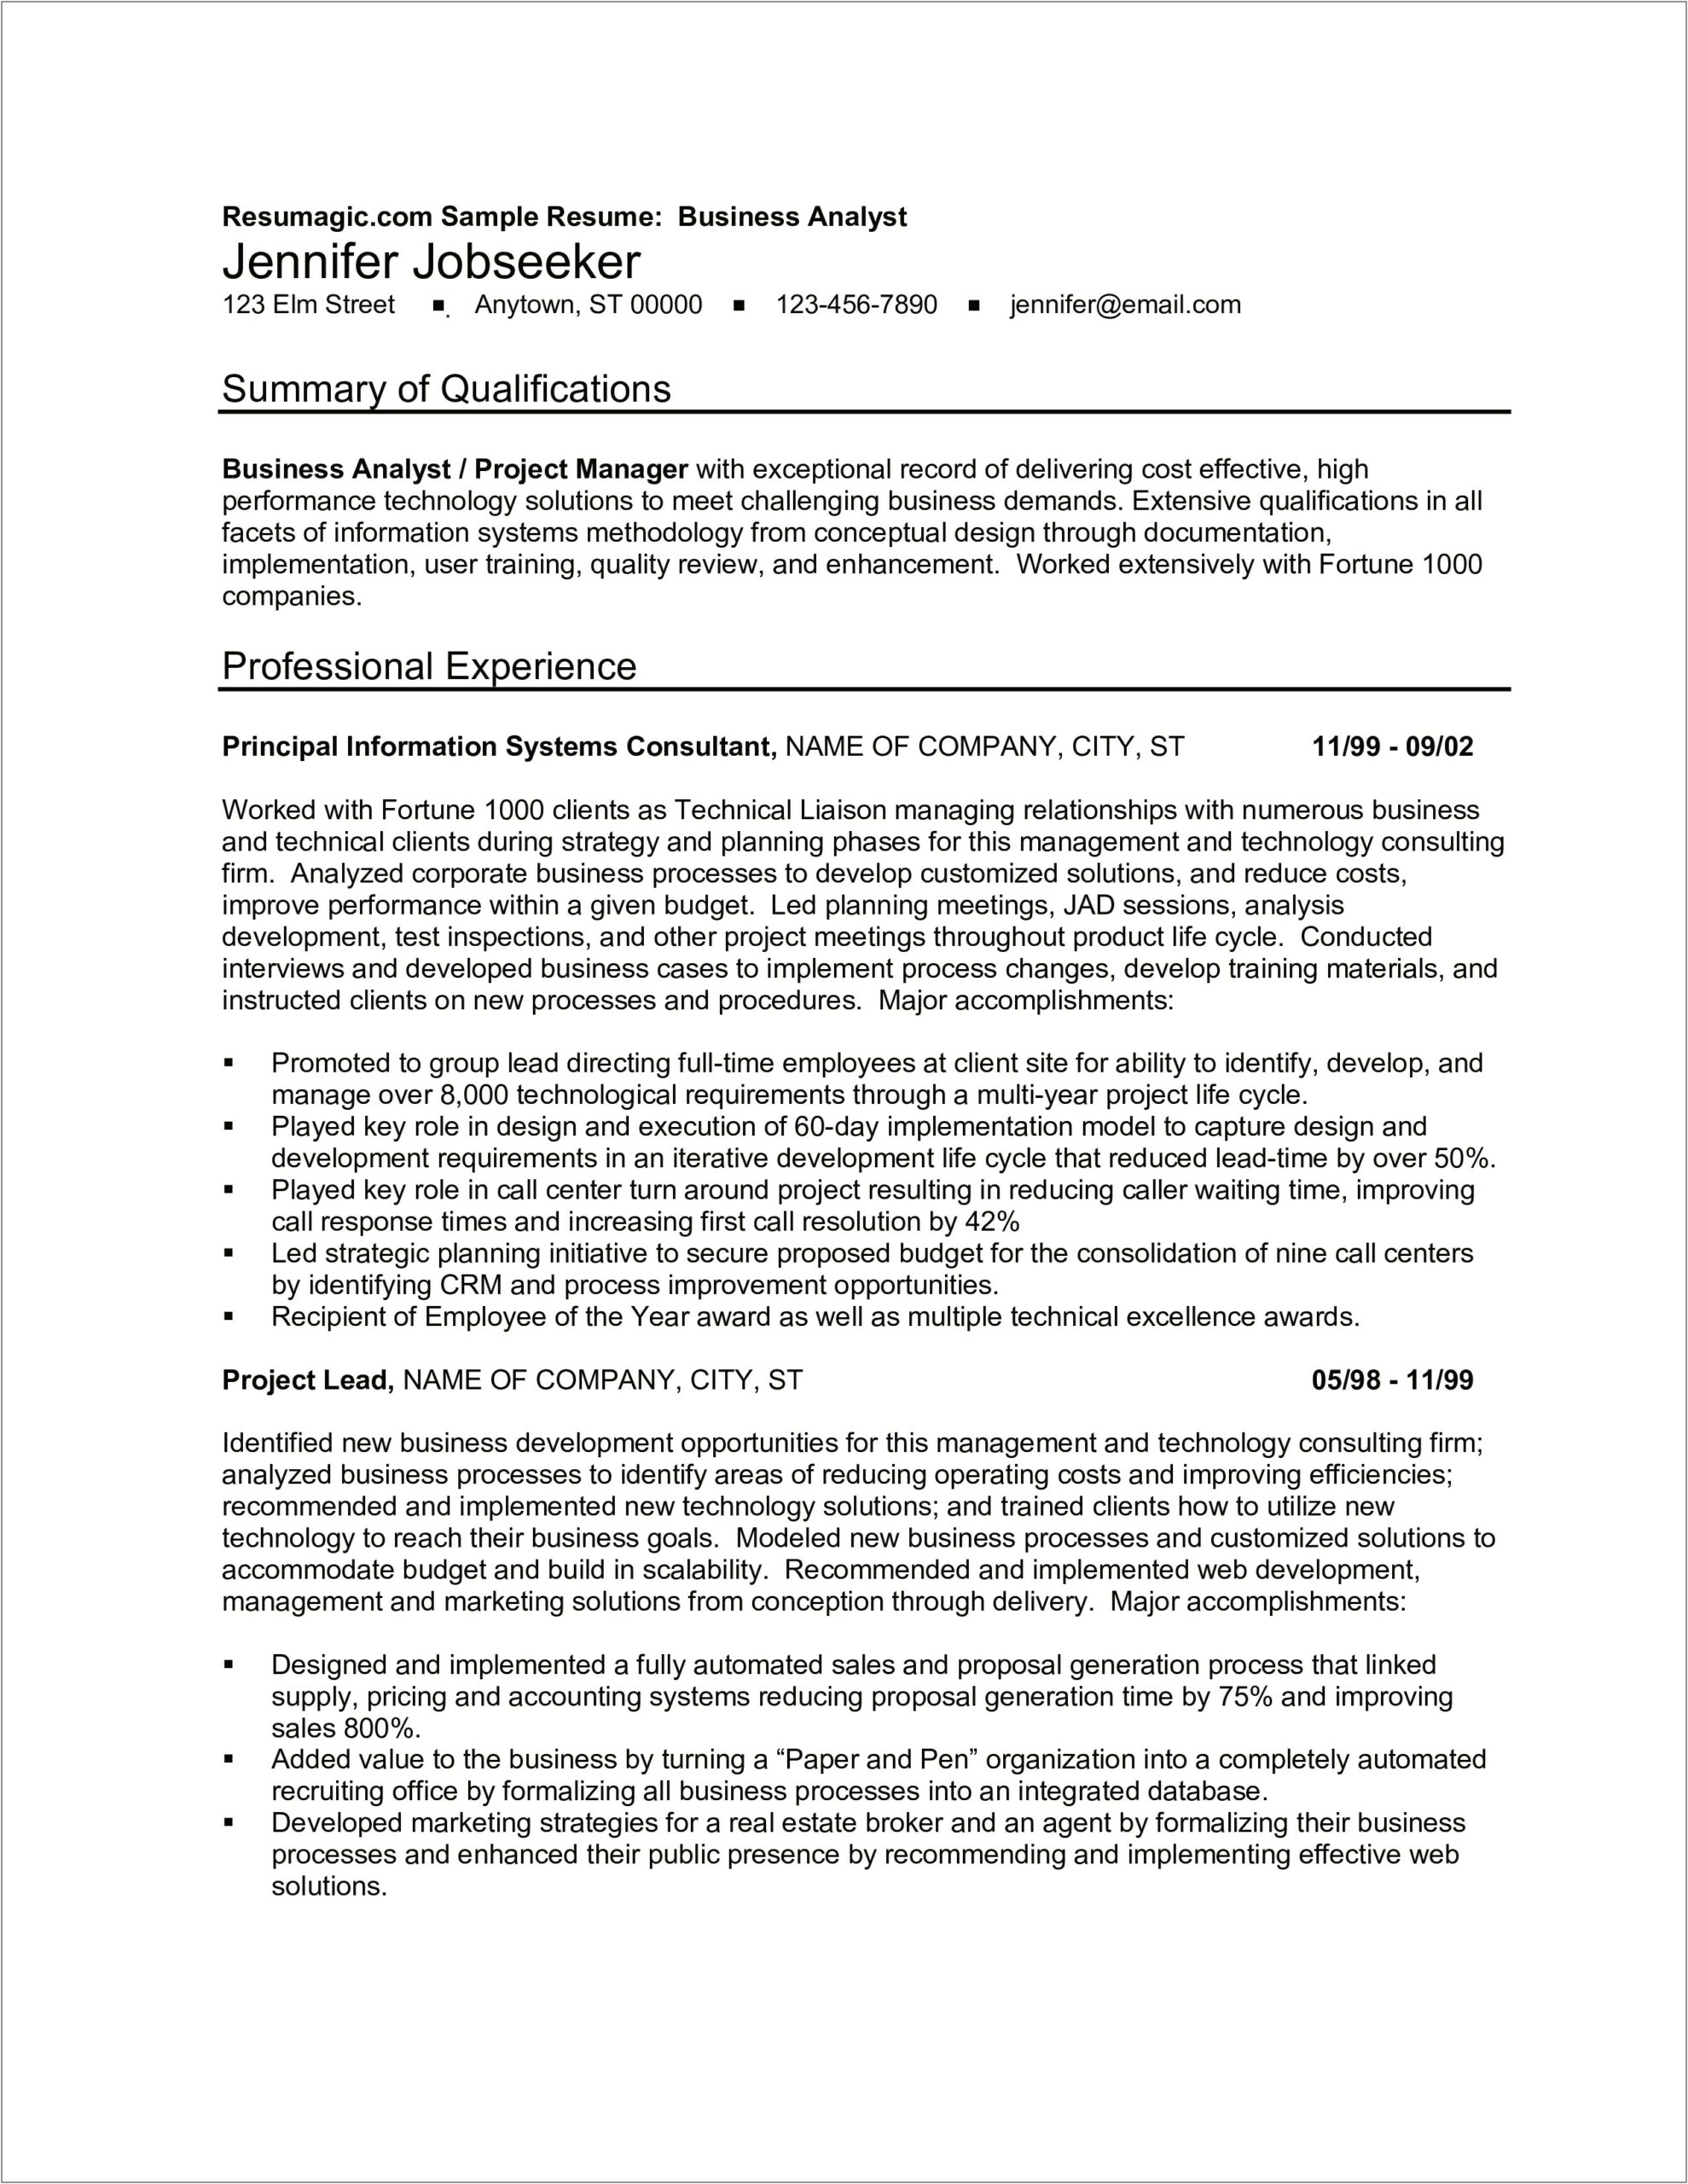 Resume Objective For Business Development Executive